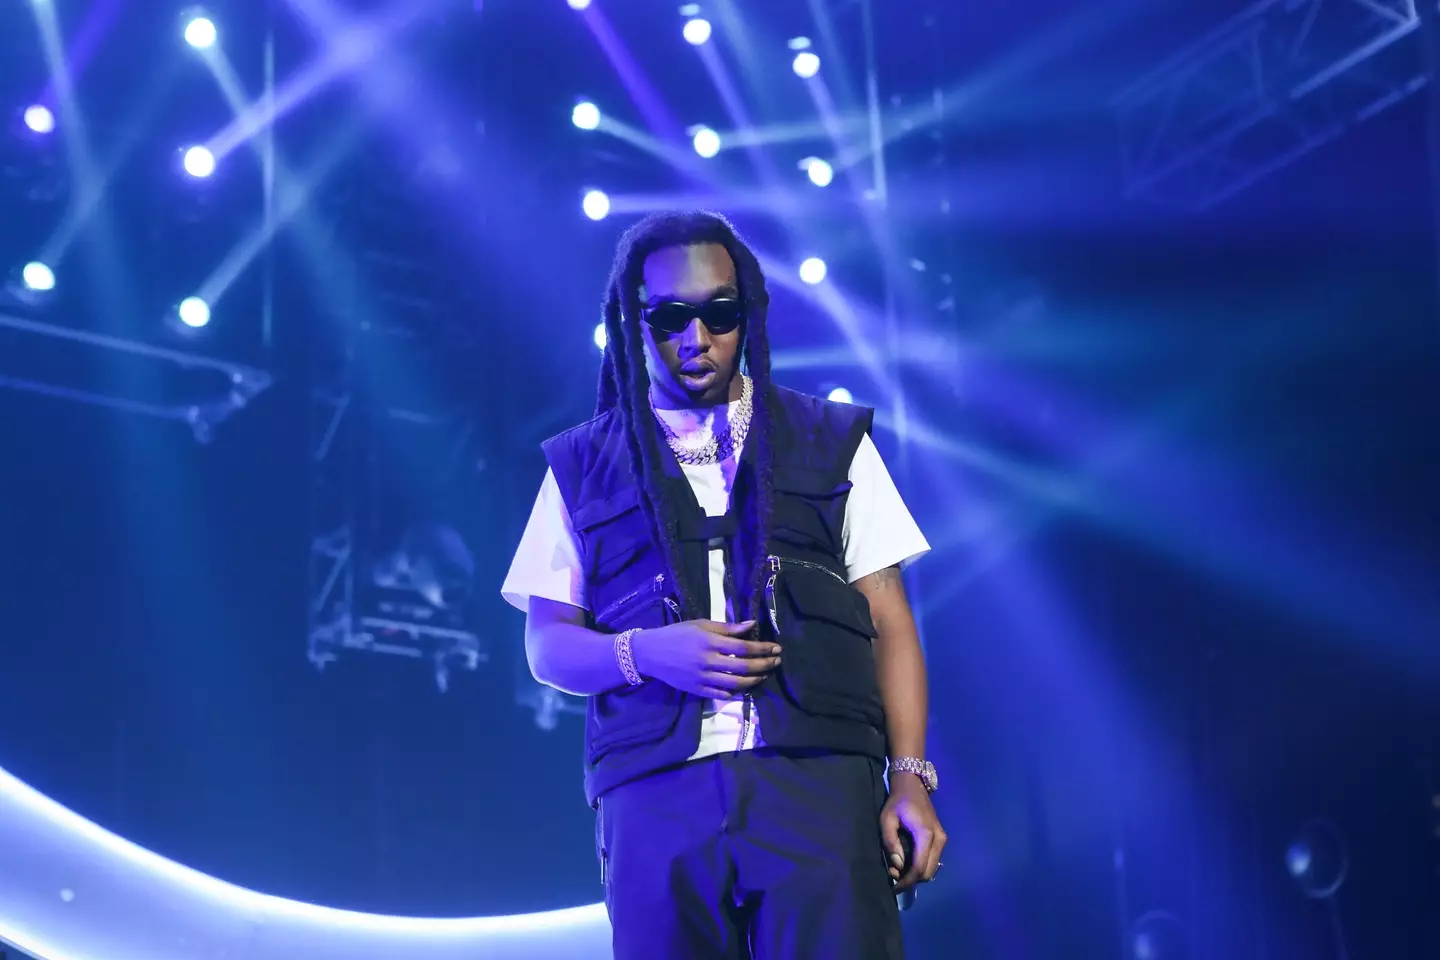 The rapper performed alongside his family and rose to fame.